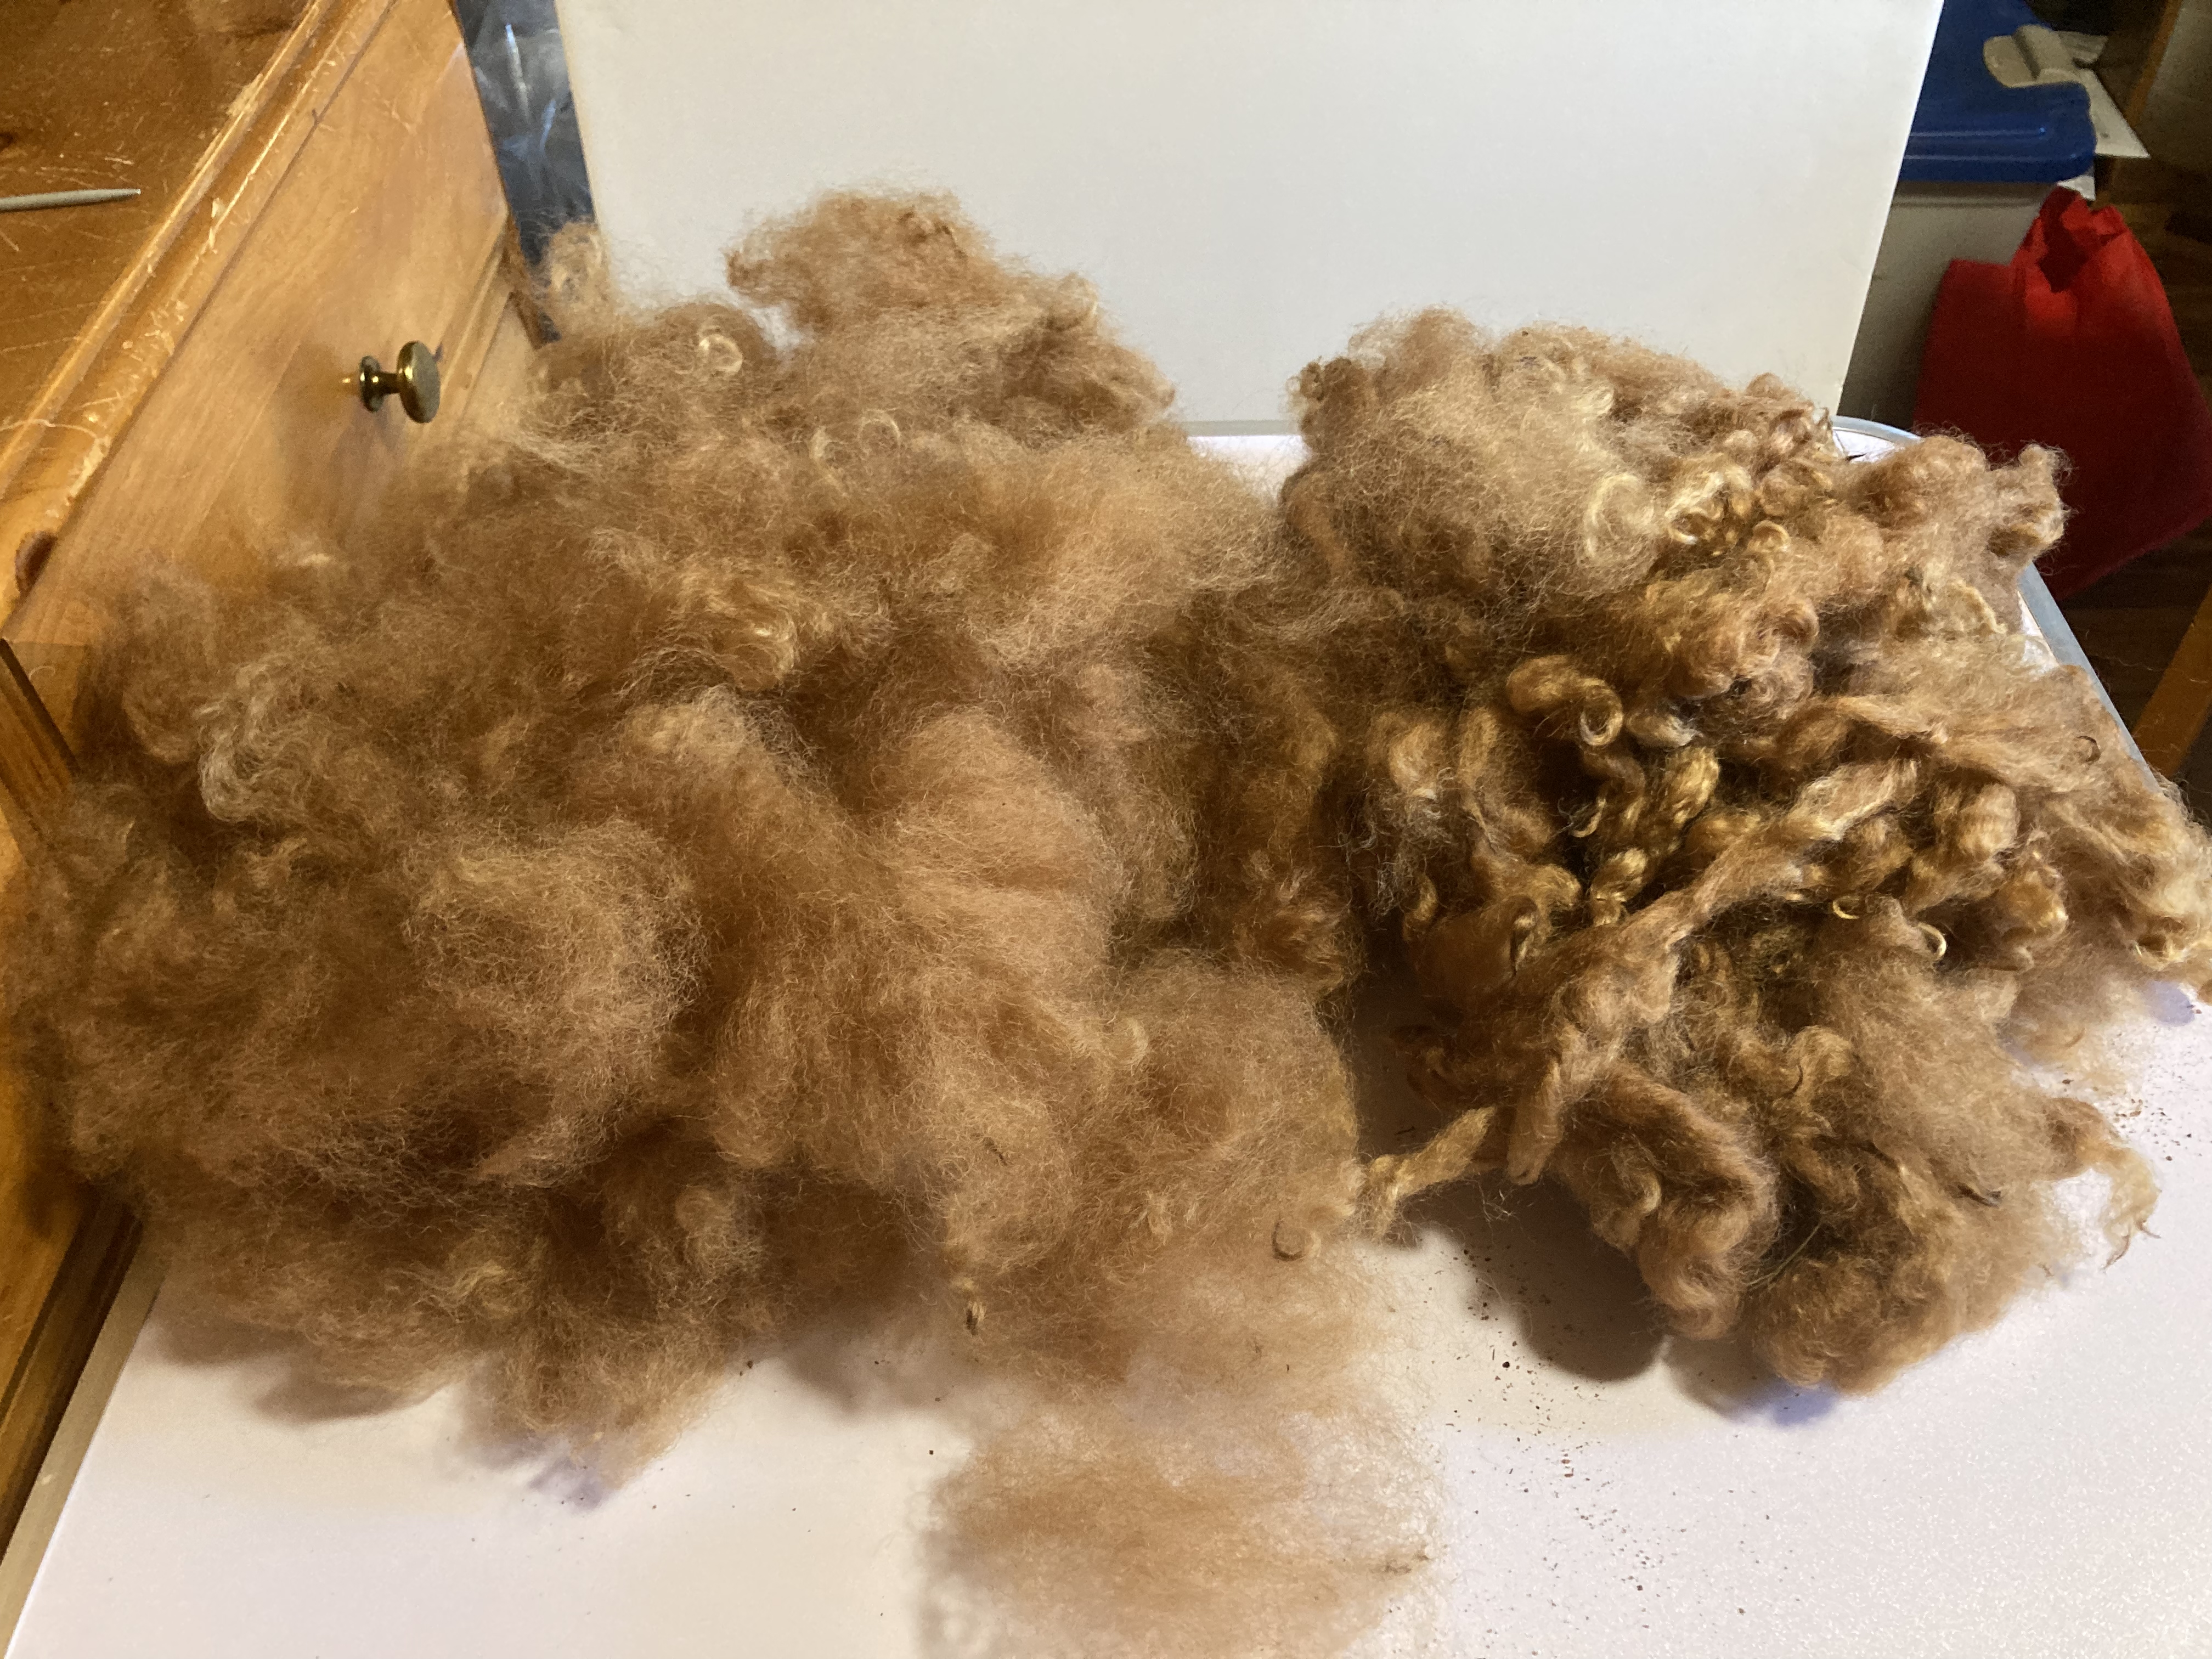 Freshly dyed wool and silk